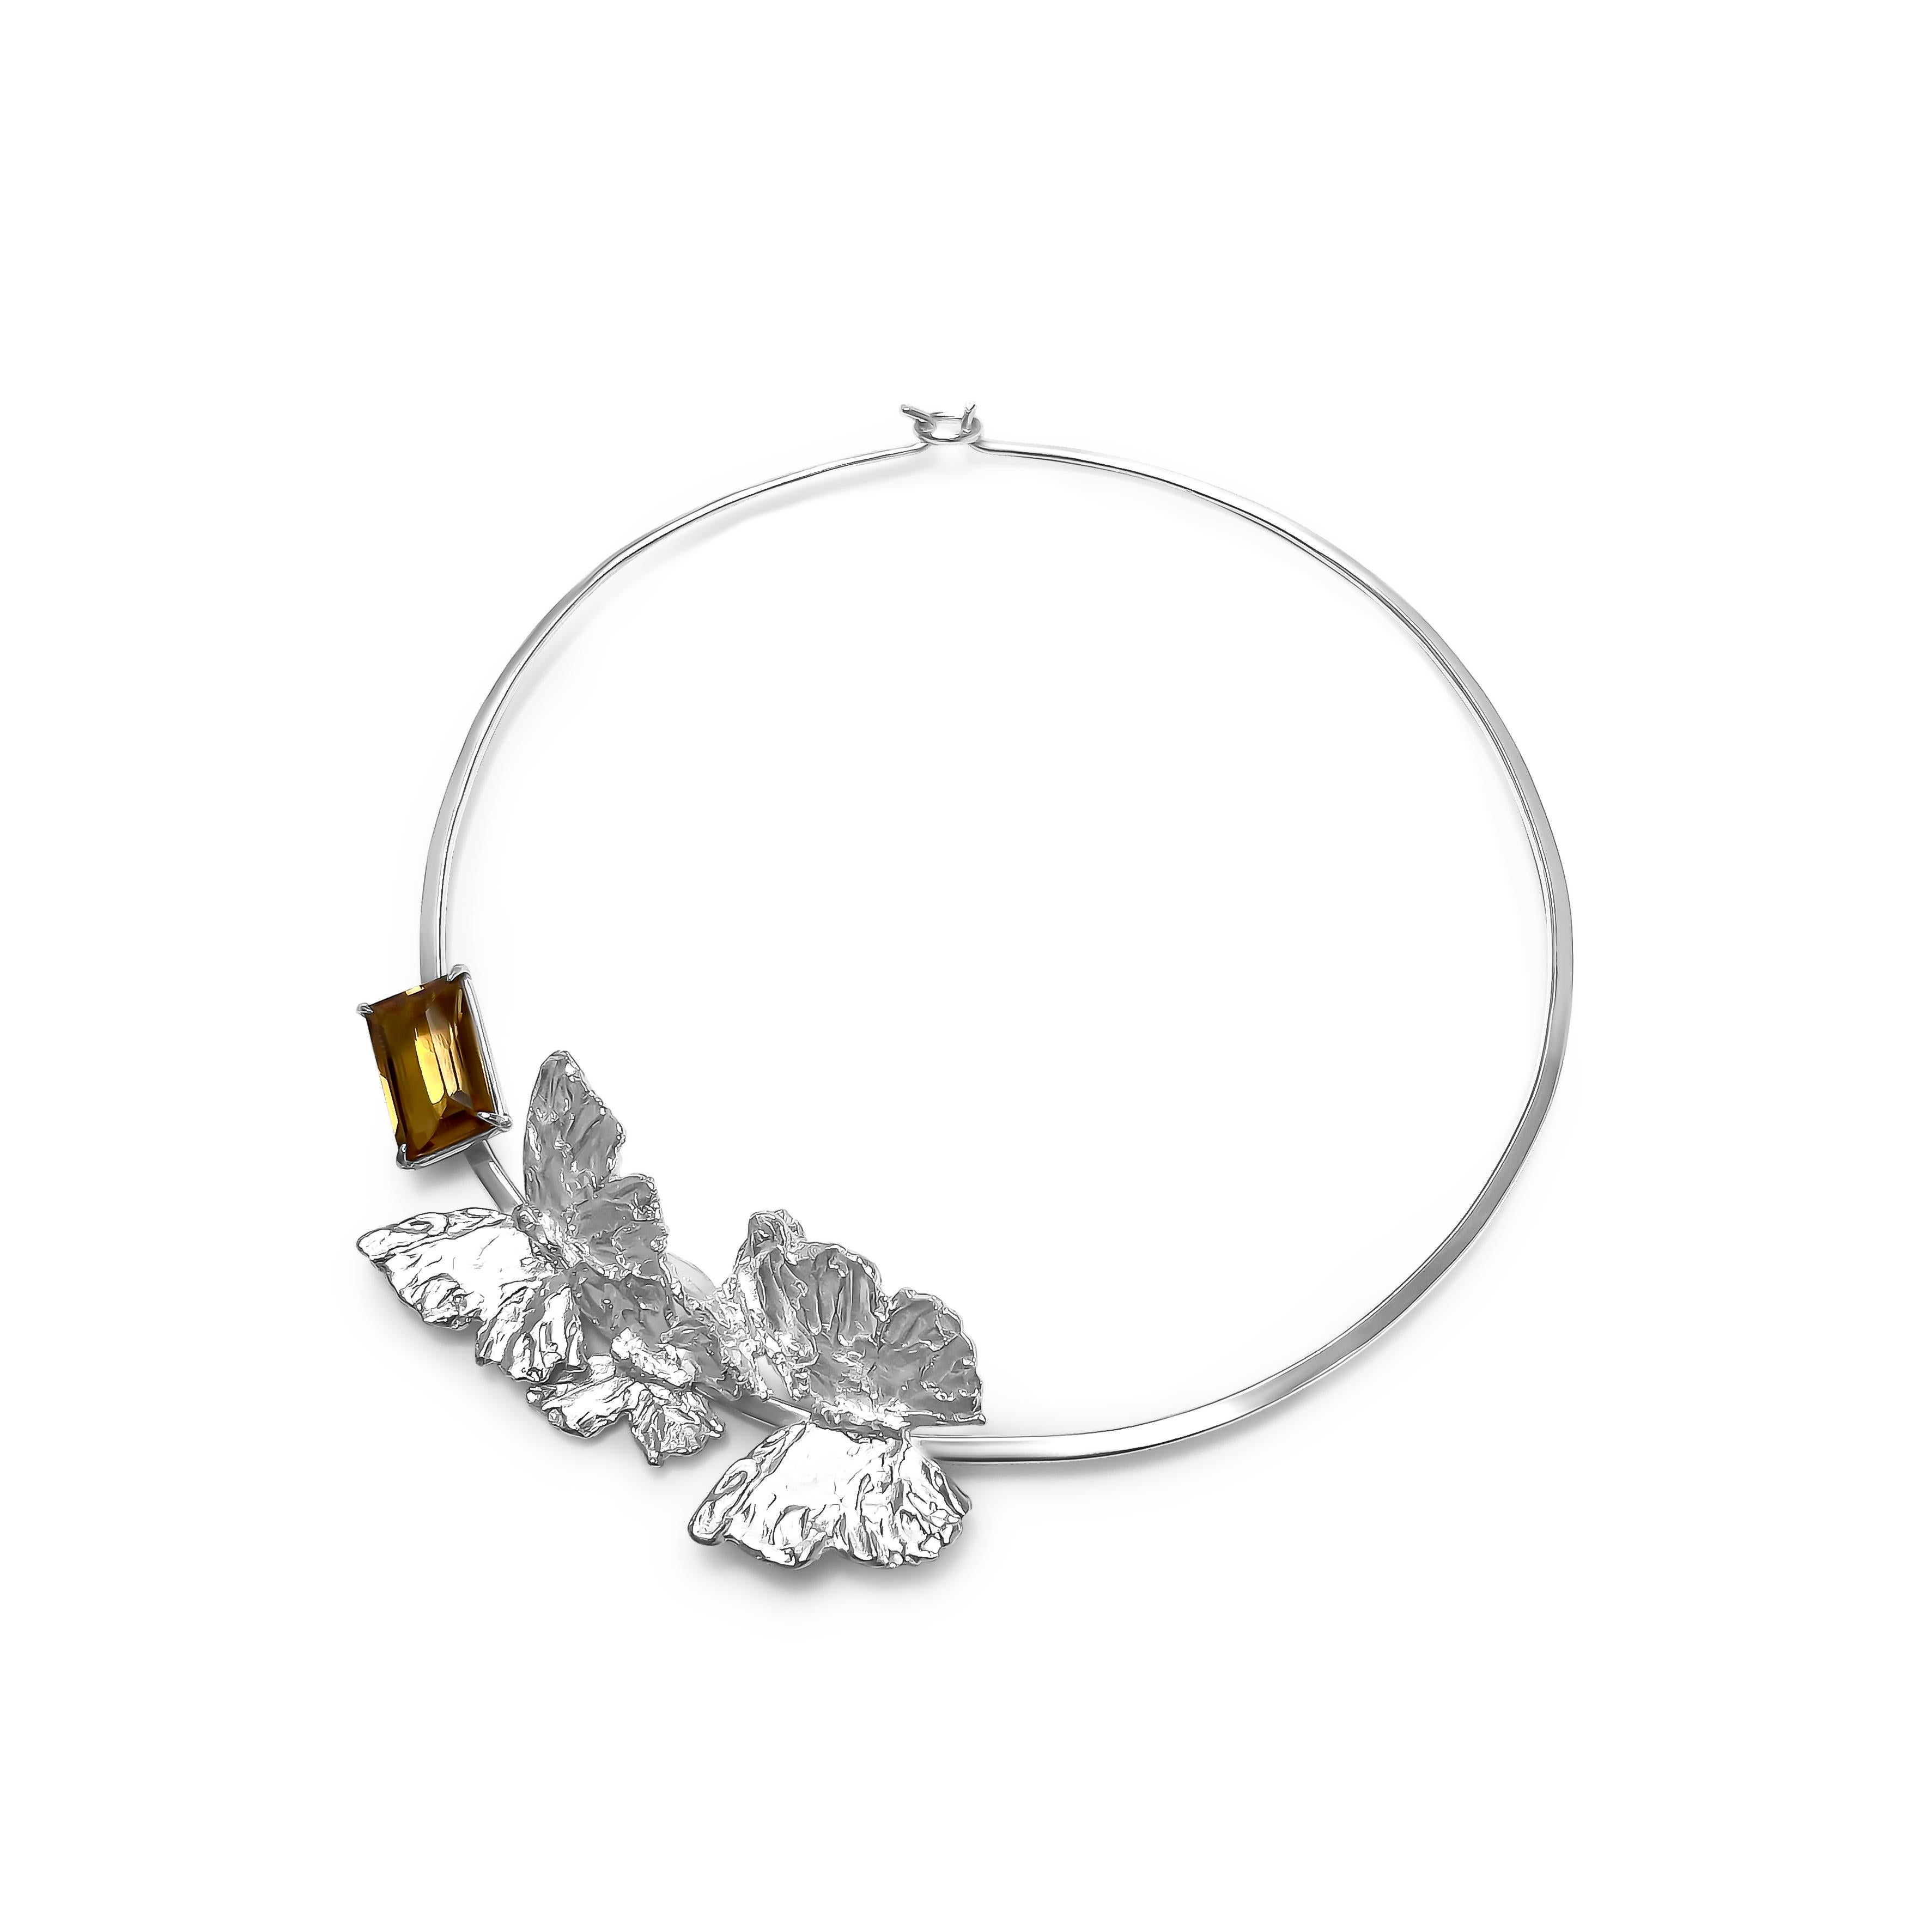 Intention: Fly Free

Design: 4 dazzling butterflies alight delicately on this lightweight collar. Citrine accents the collar bone, bringing light to the face and contrasting with the natural texture of the butterflies. A reminder to reach for your